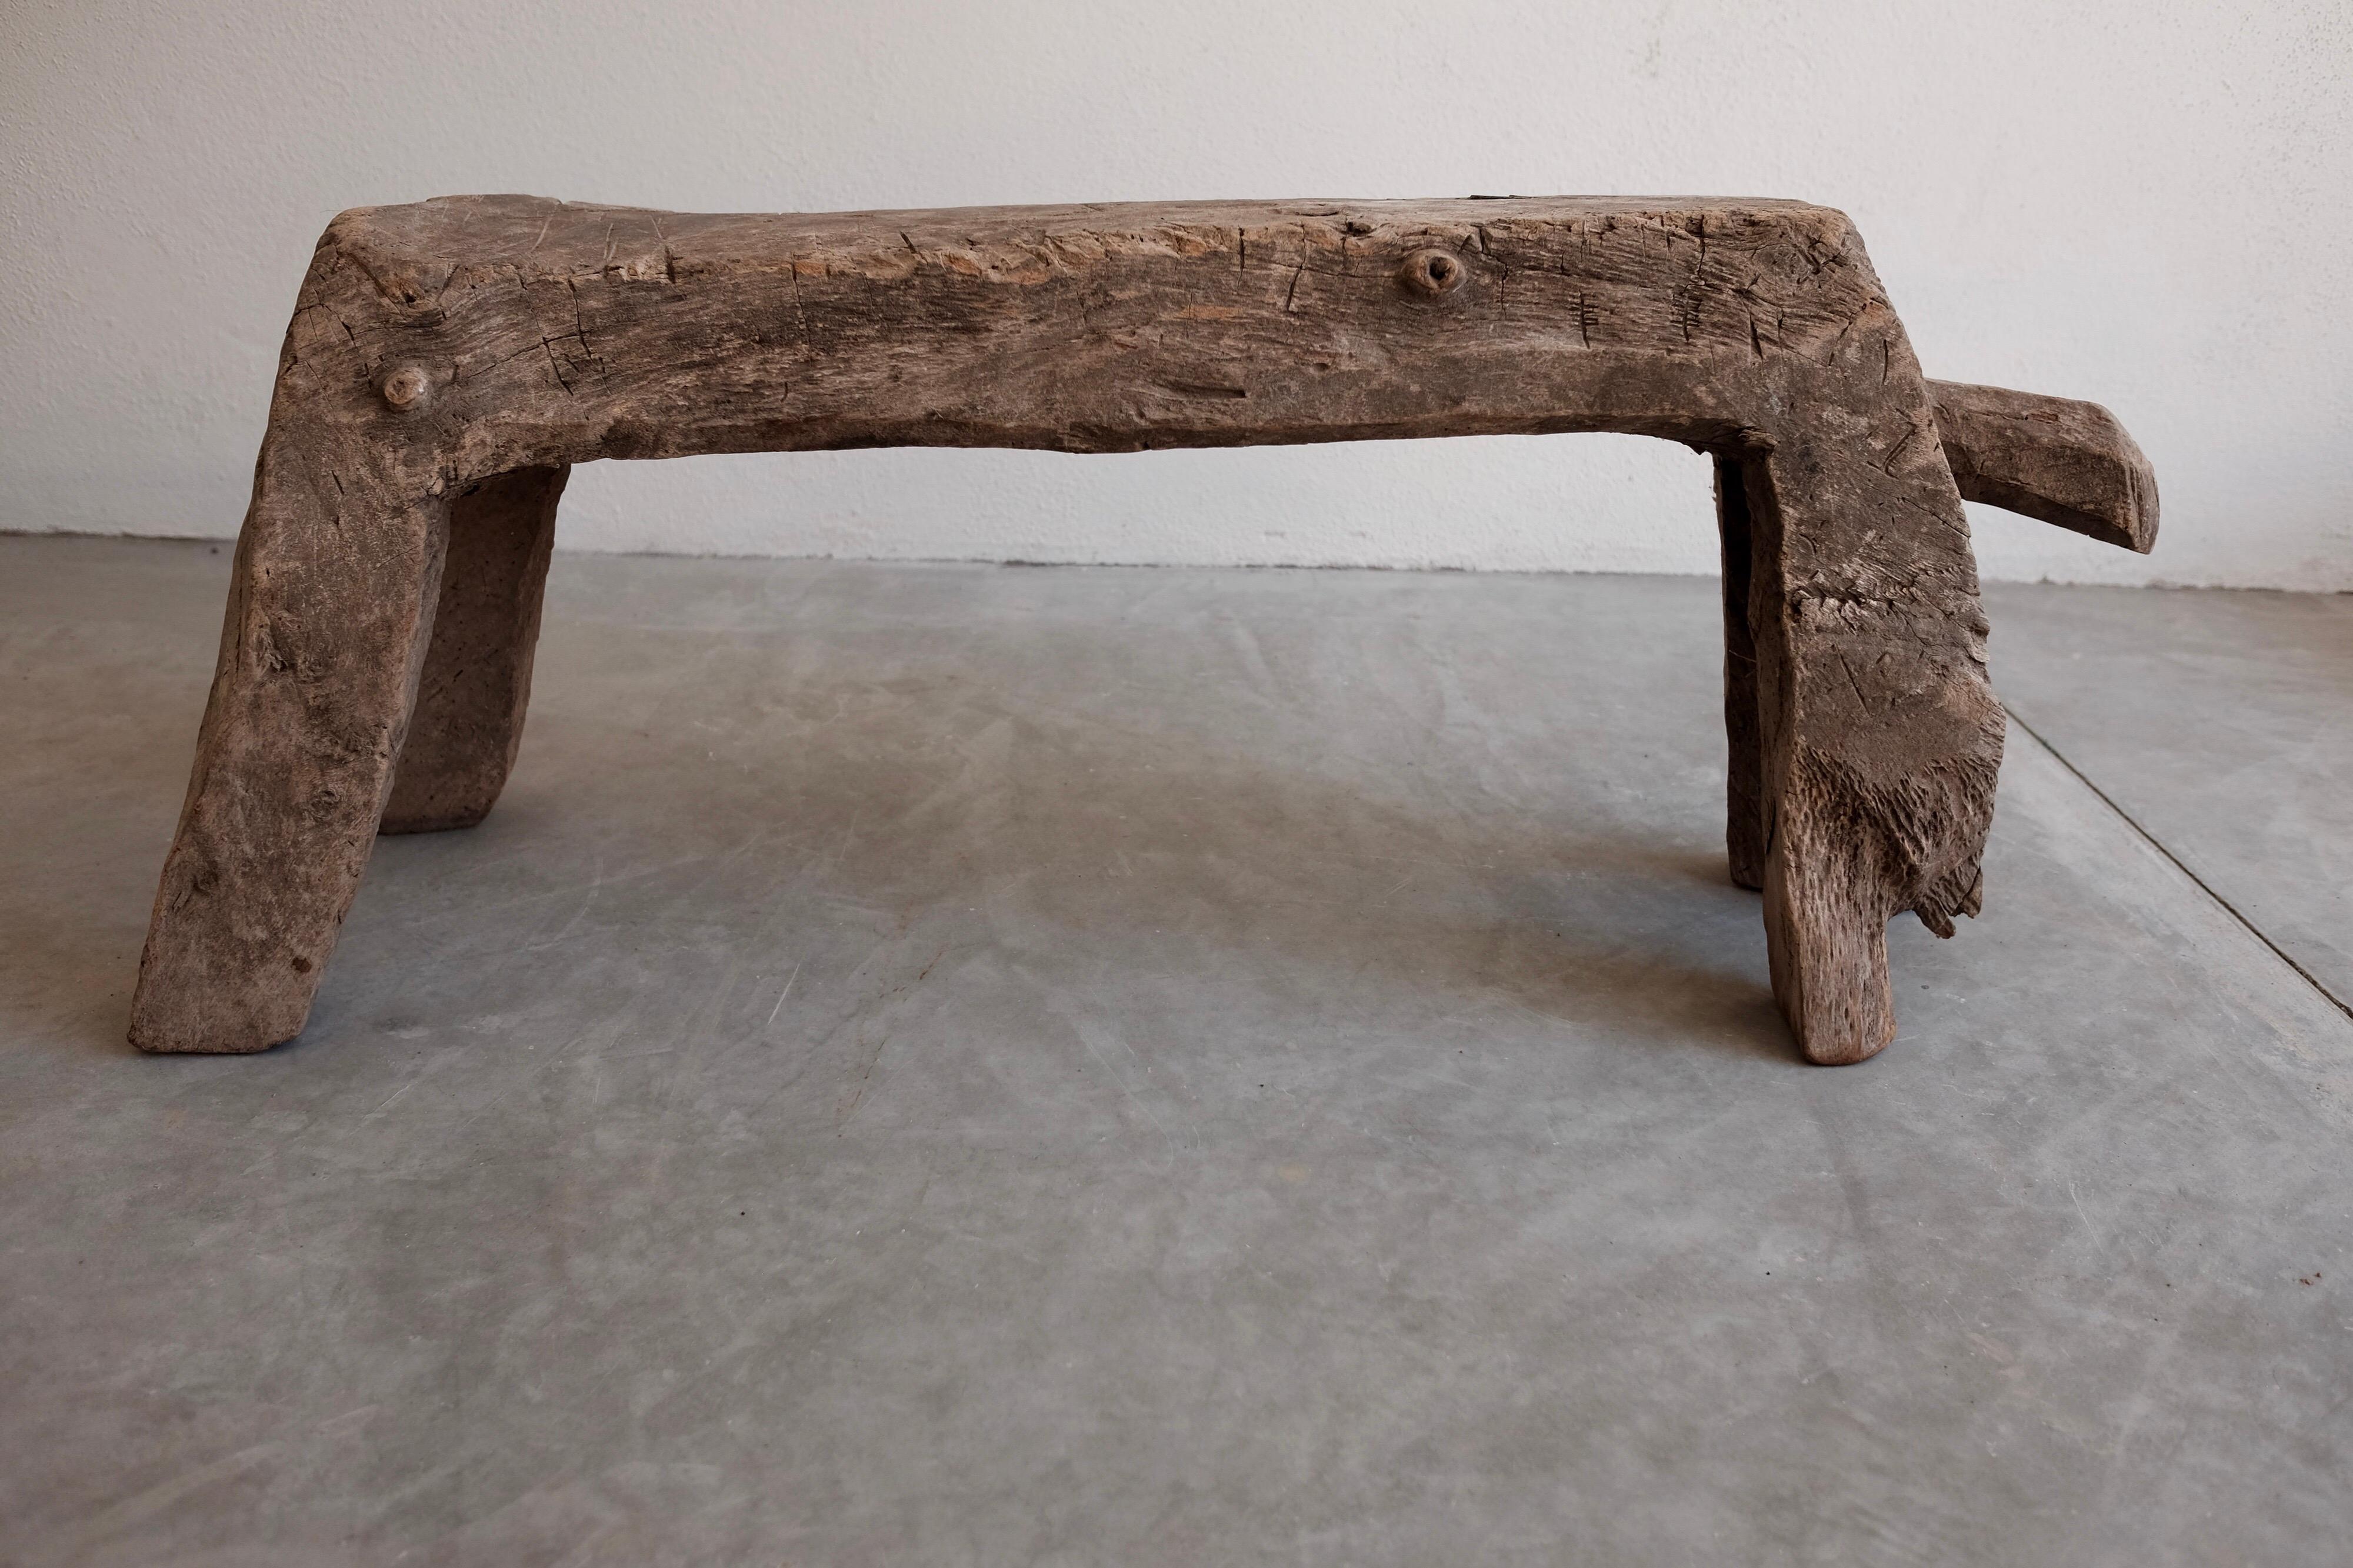 One-piece, primitive-styled, low mesquite bench from San Felipe, Guanajuato. Carved and formed by axe and chisel.